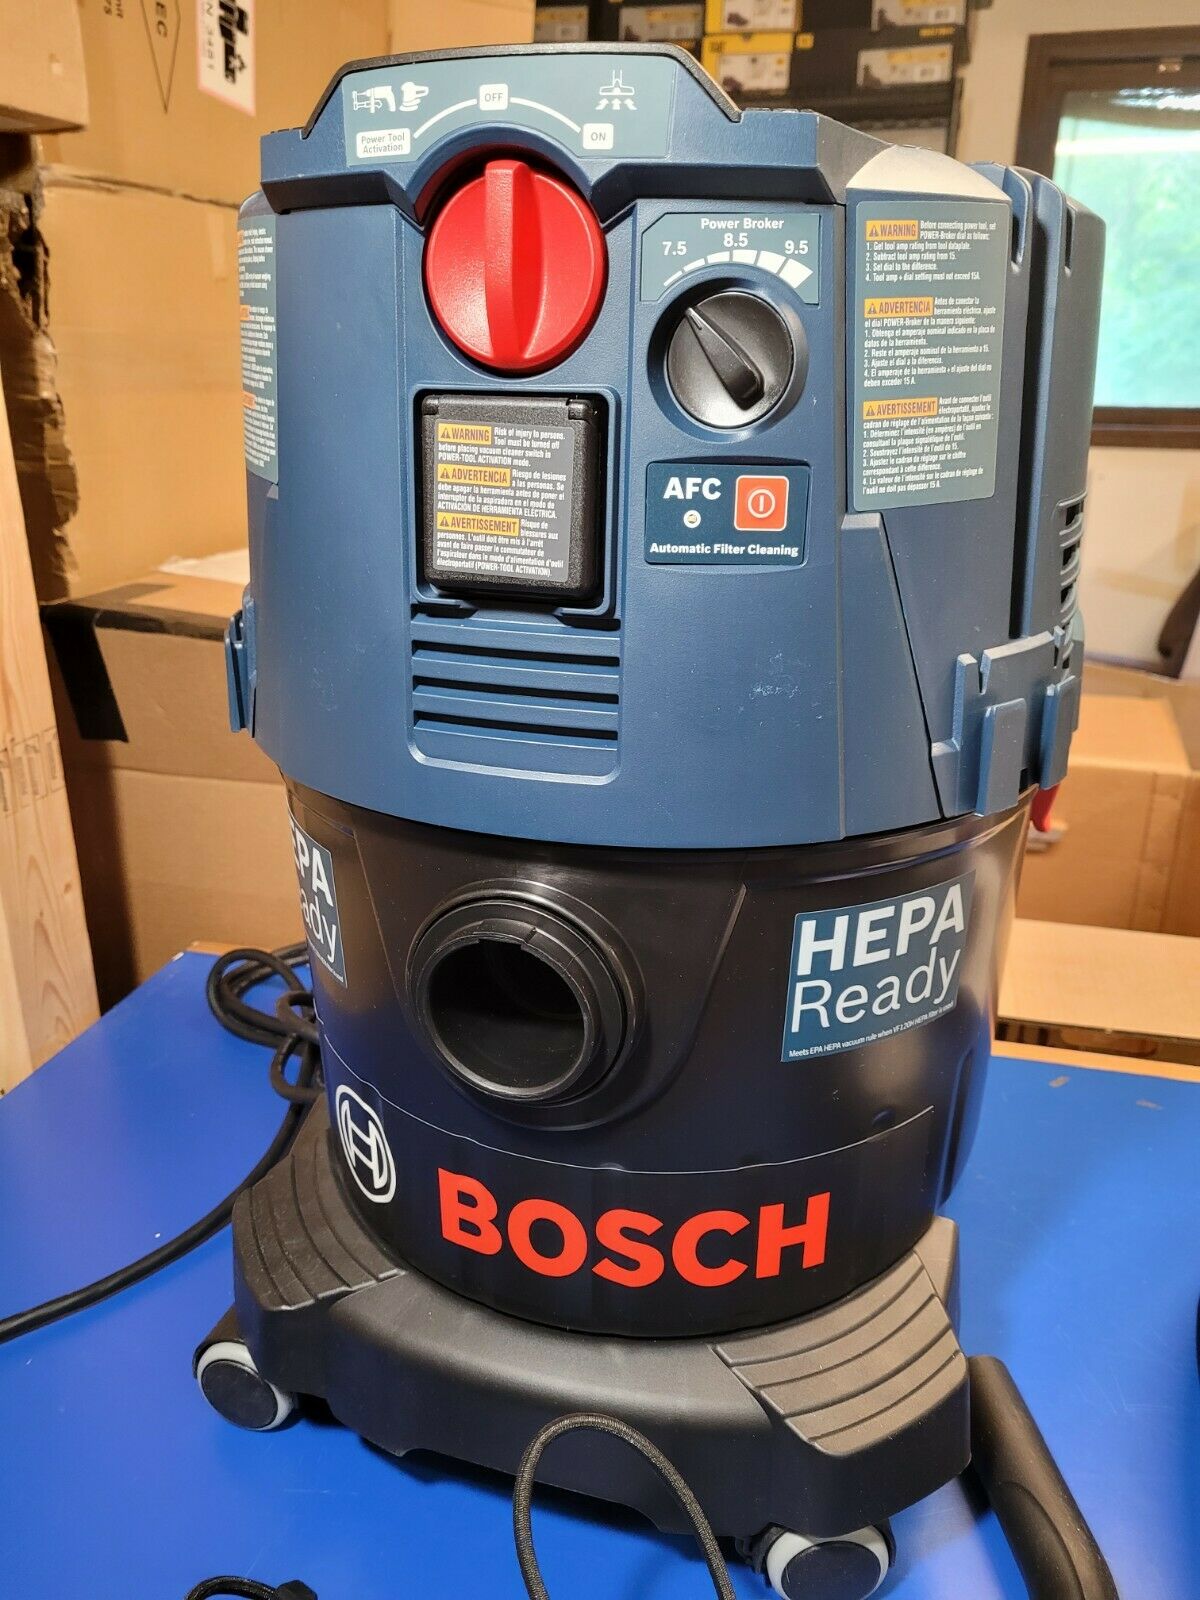 Bosch Vac090ah 9-gal Dust Extractor Auto Filter Clean And Hepa Filter Open Box